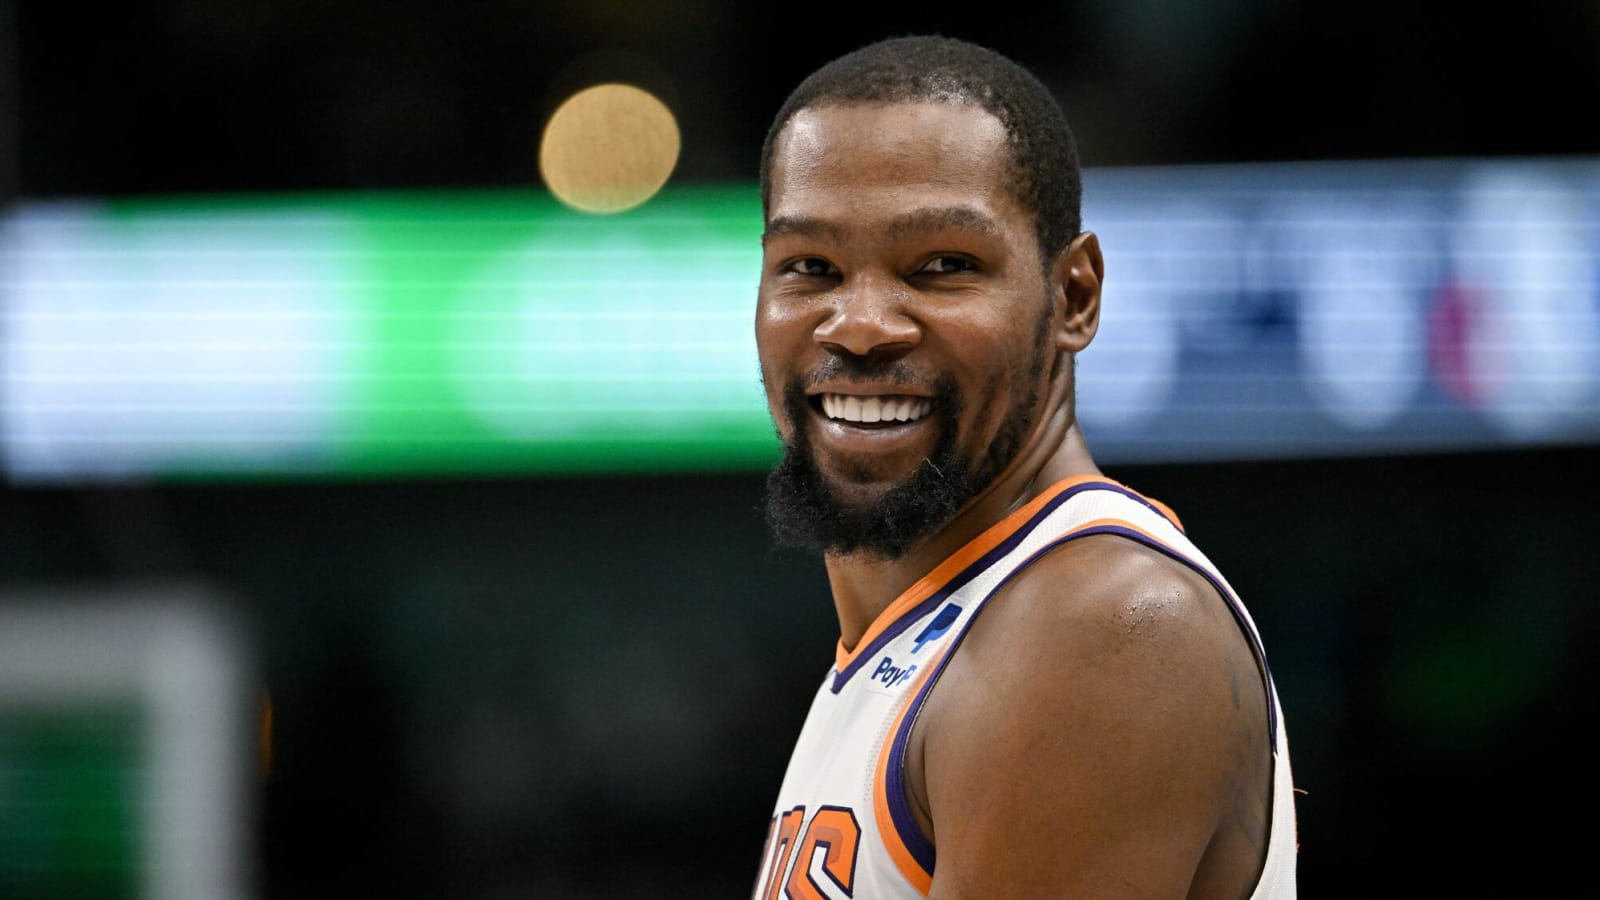 Watch: Durant nixed with injured left ankle sustained in warmups